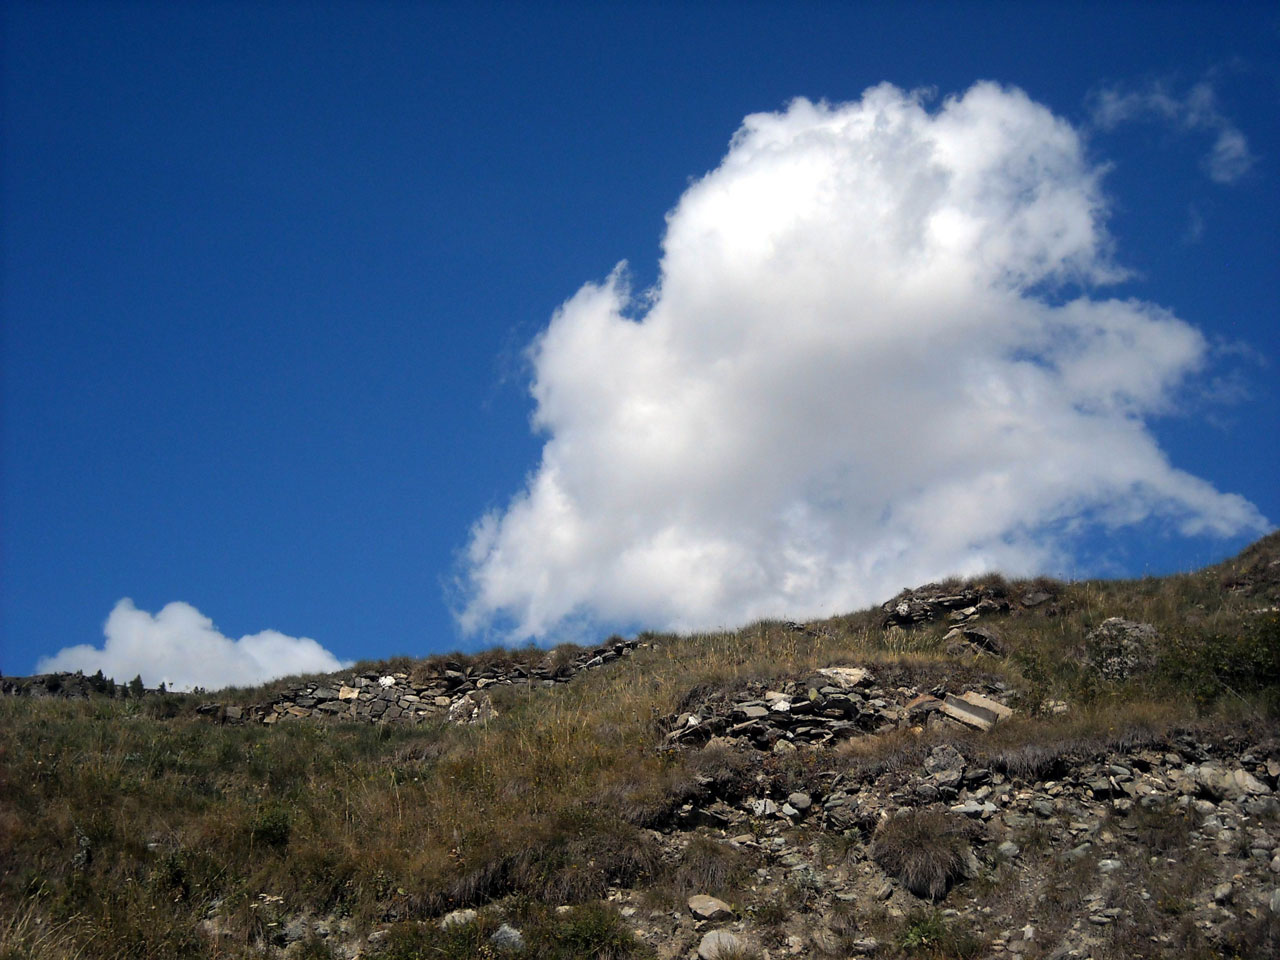 Cloud on top of a mountain